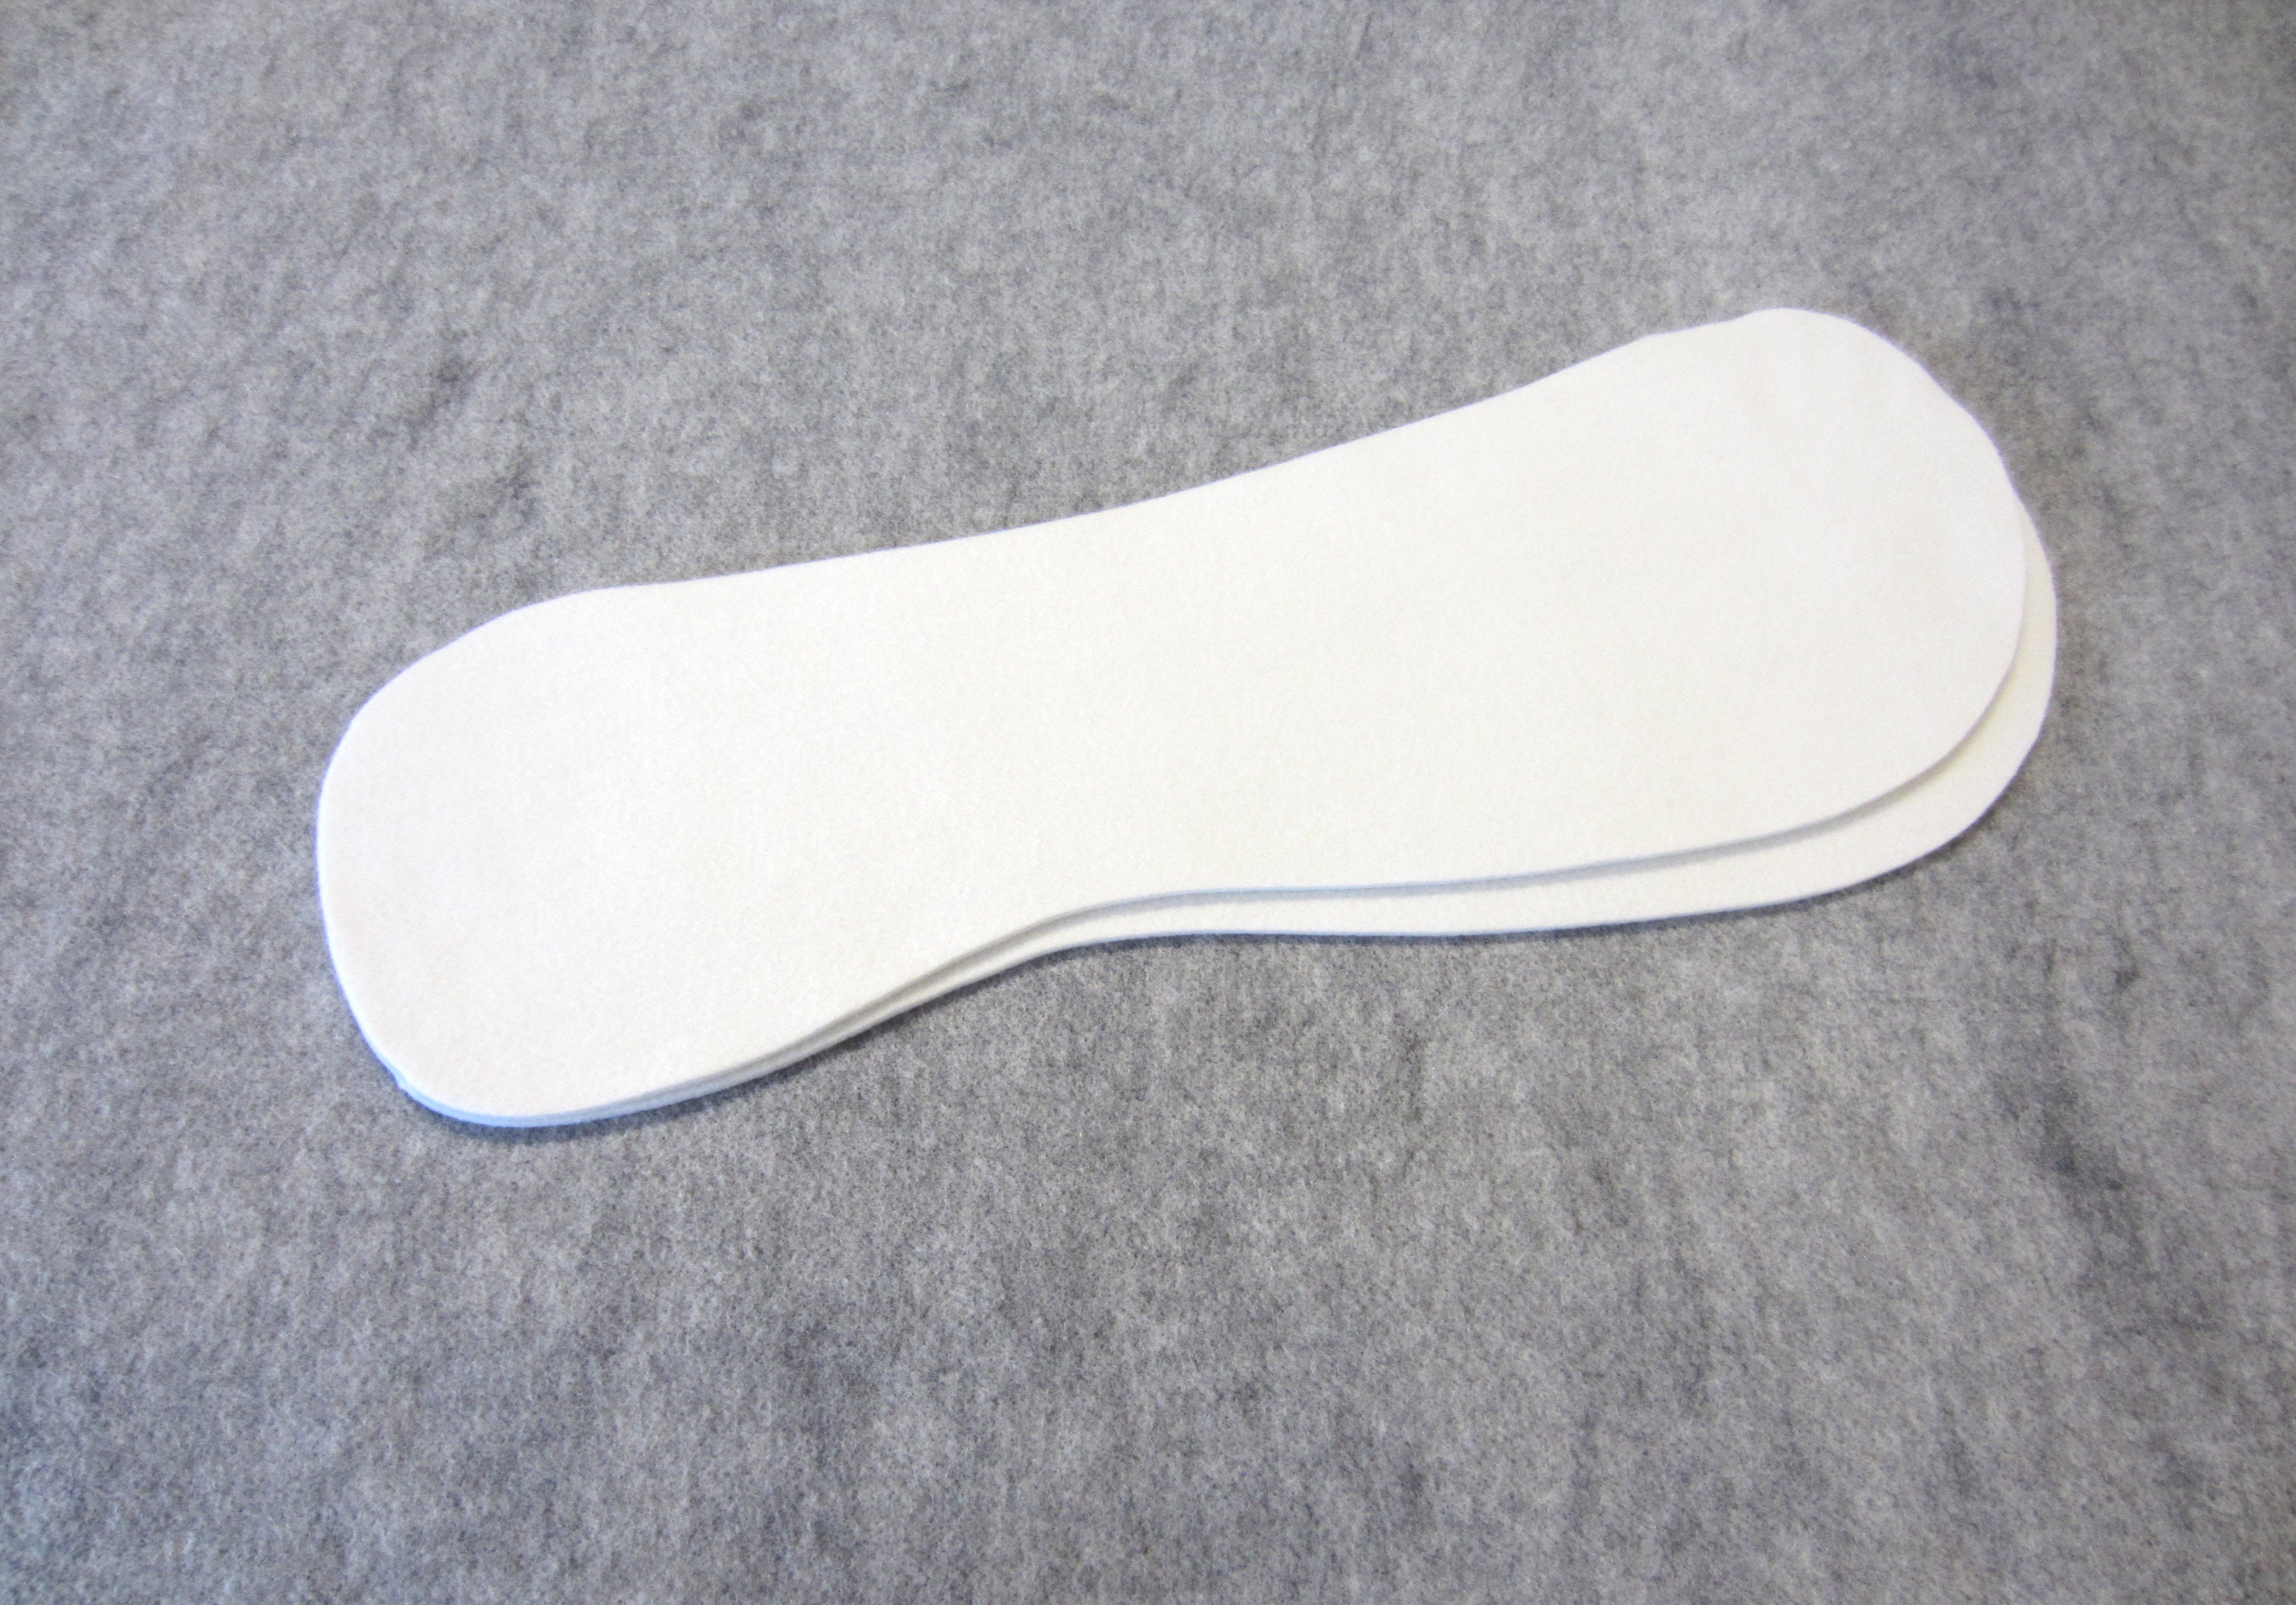 1 pair of felt inserts 5 mm high - standard shape for padding, balancing saddle pads or pads